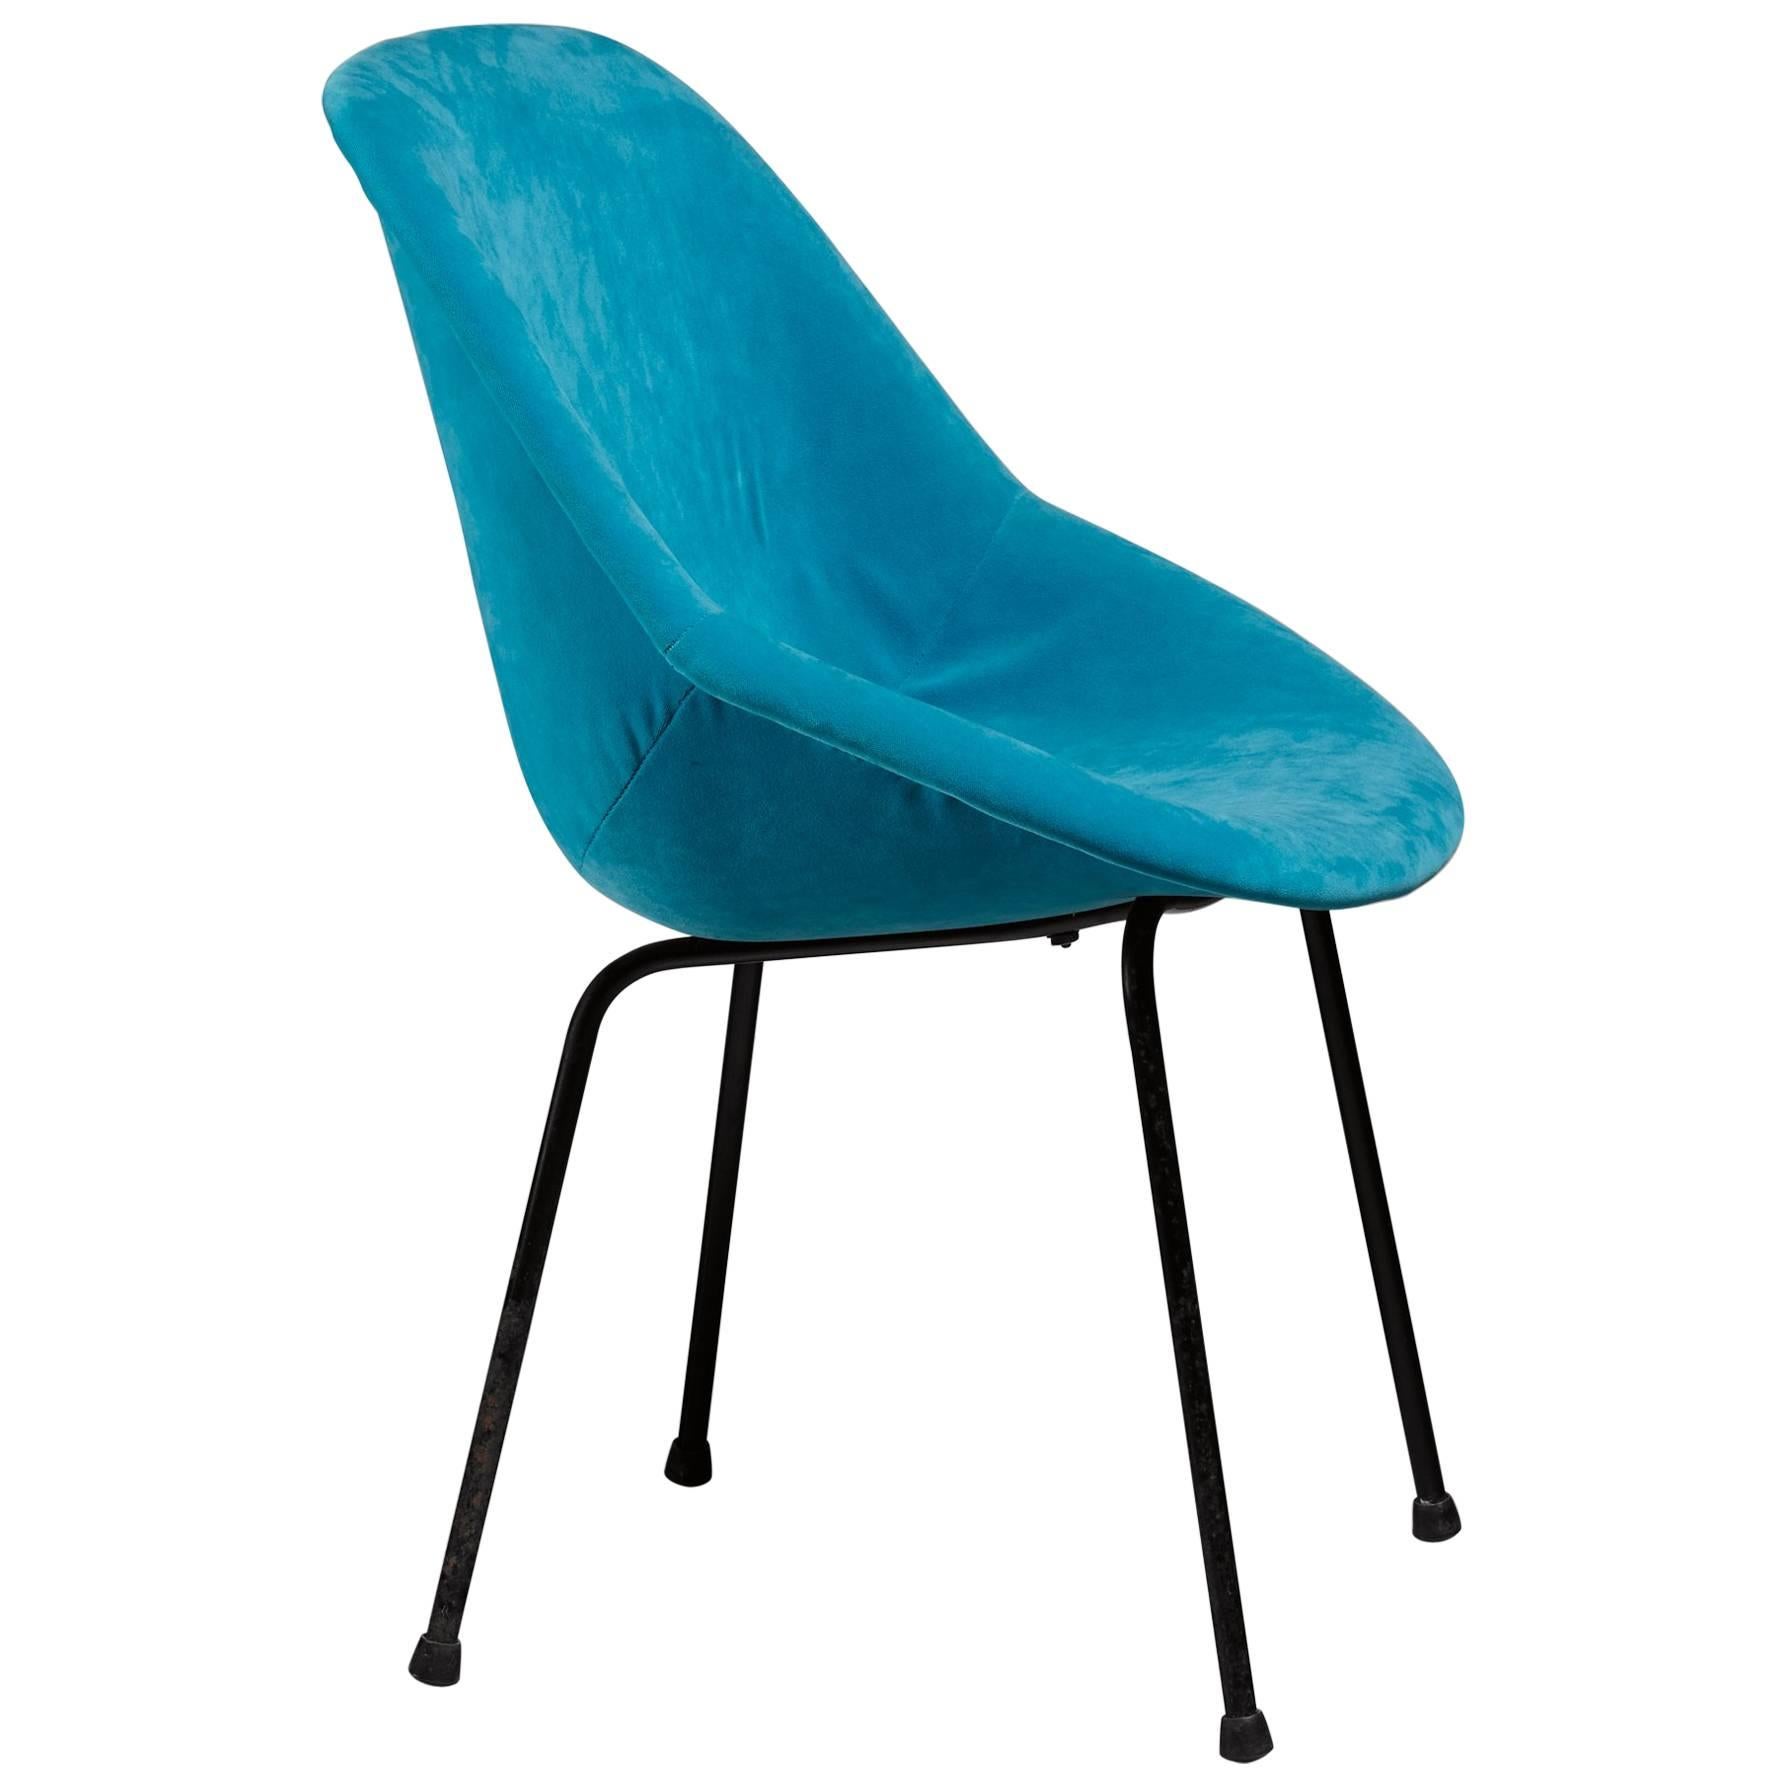 Genevieve Dangles Blue Chair for Burov, France, 1950s For Sale